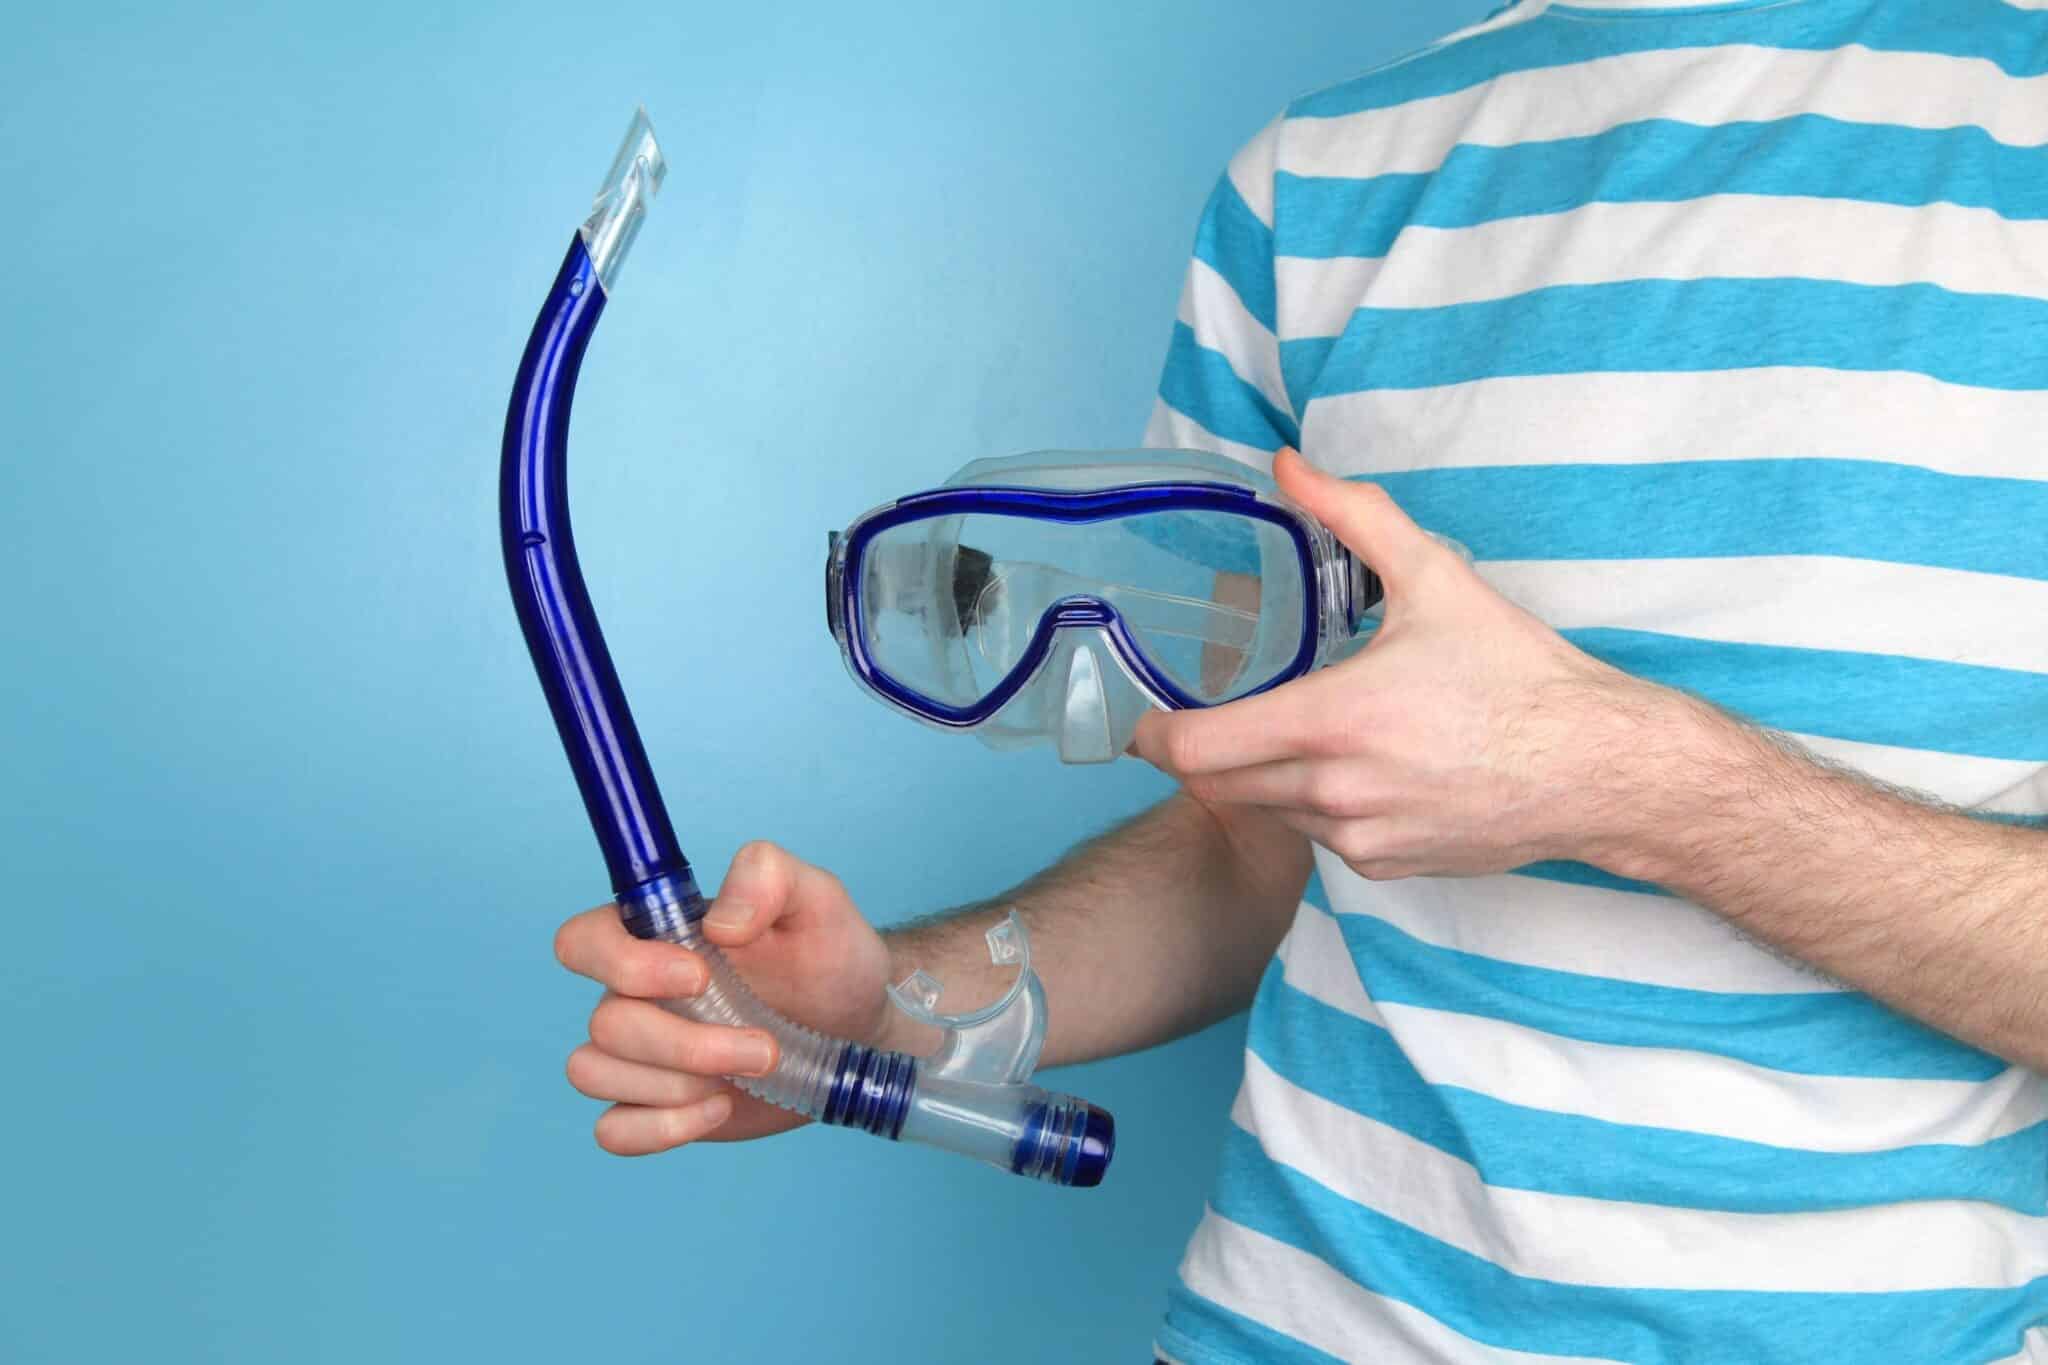 How To Disinfect Snorkel Gear